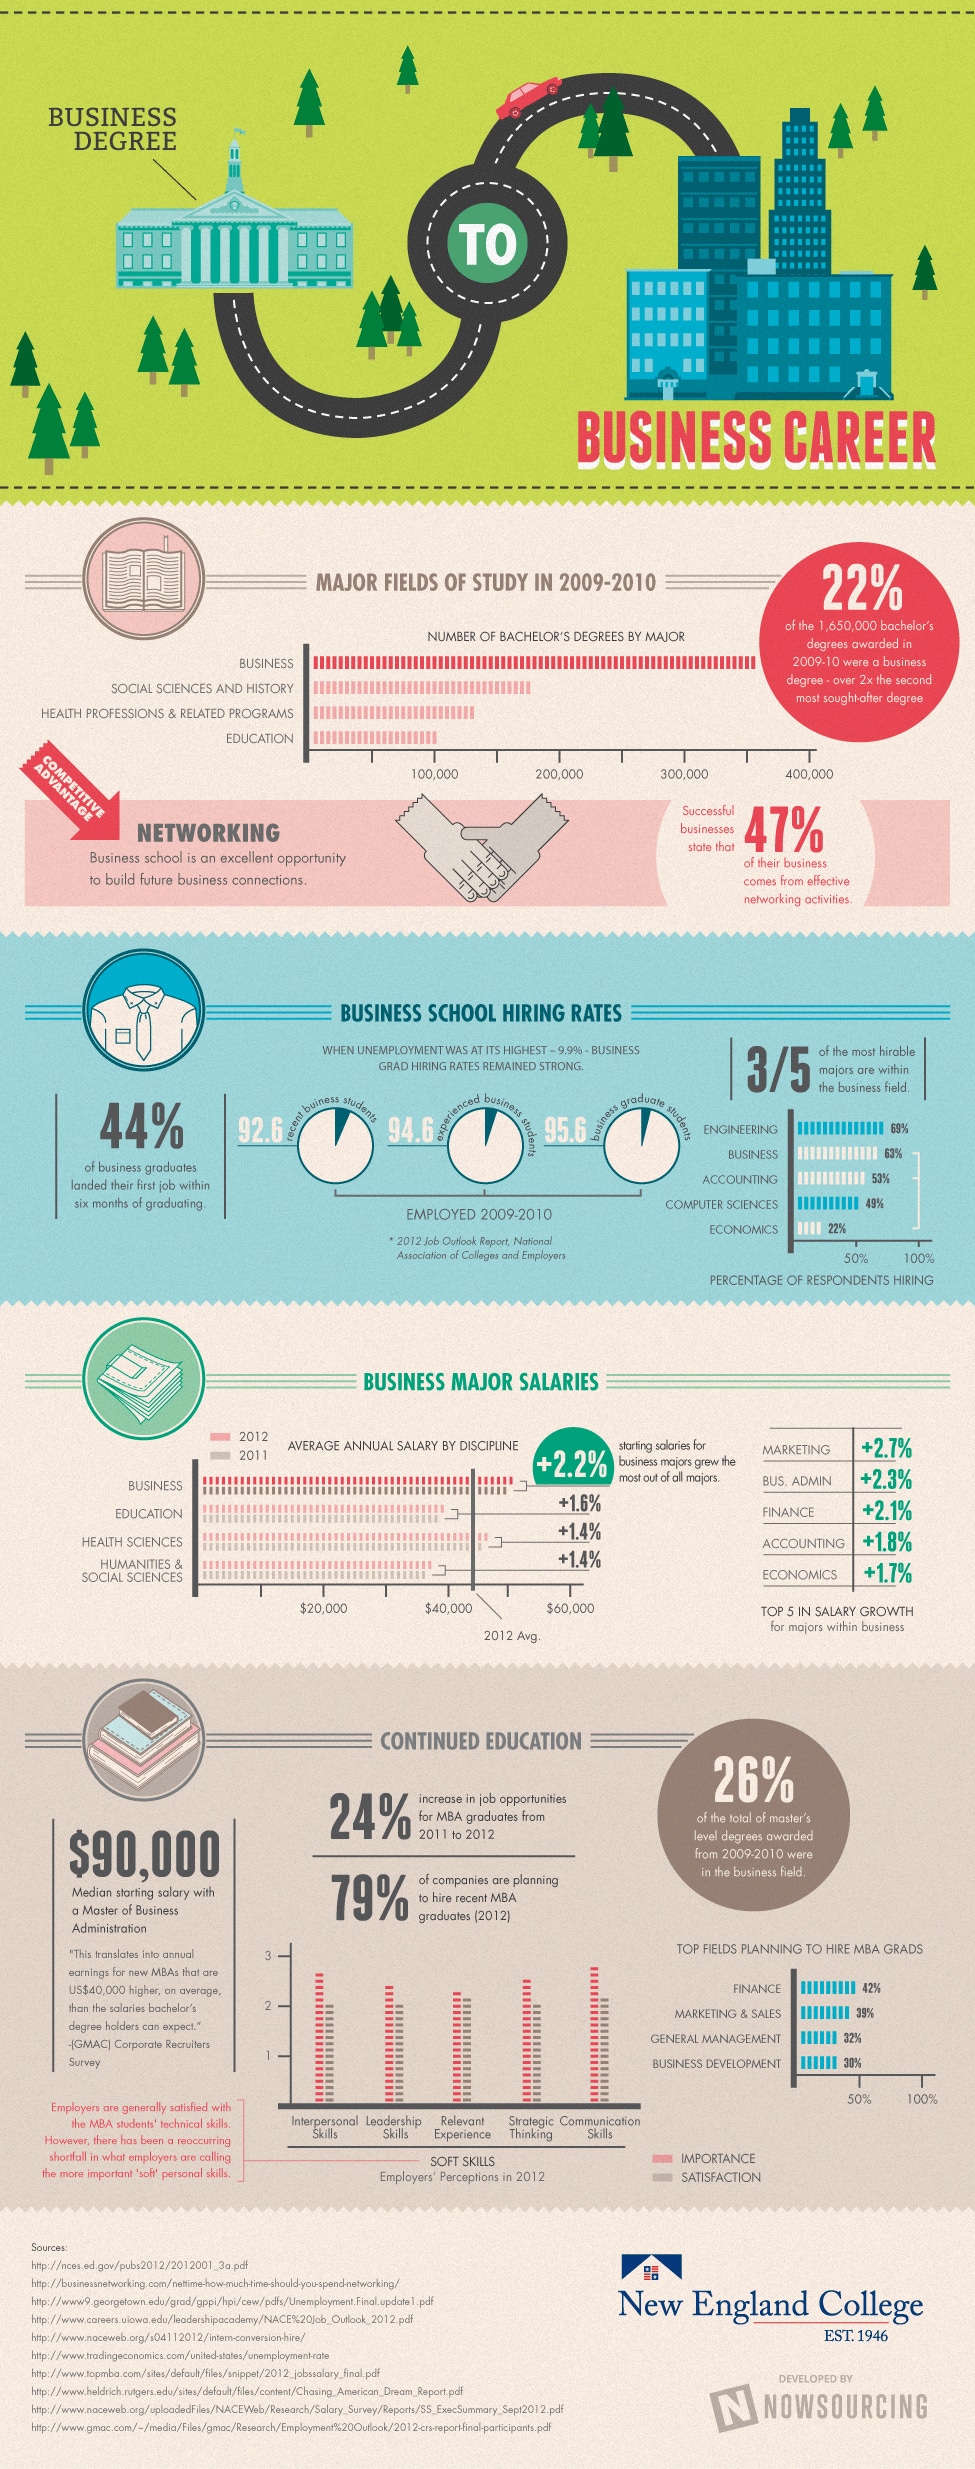 A Business Degree May Be More Versatile Than You Realize [Infographic]